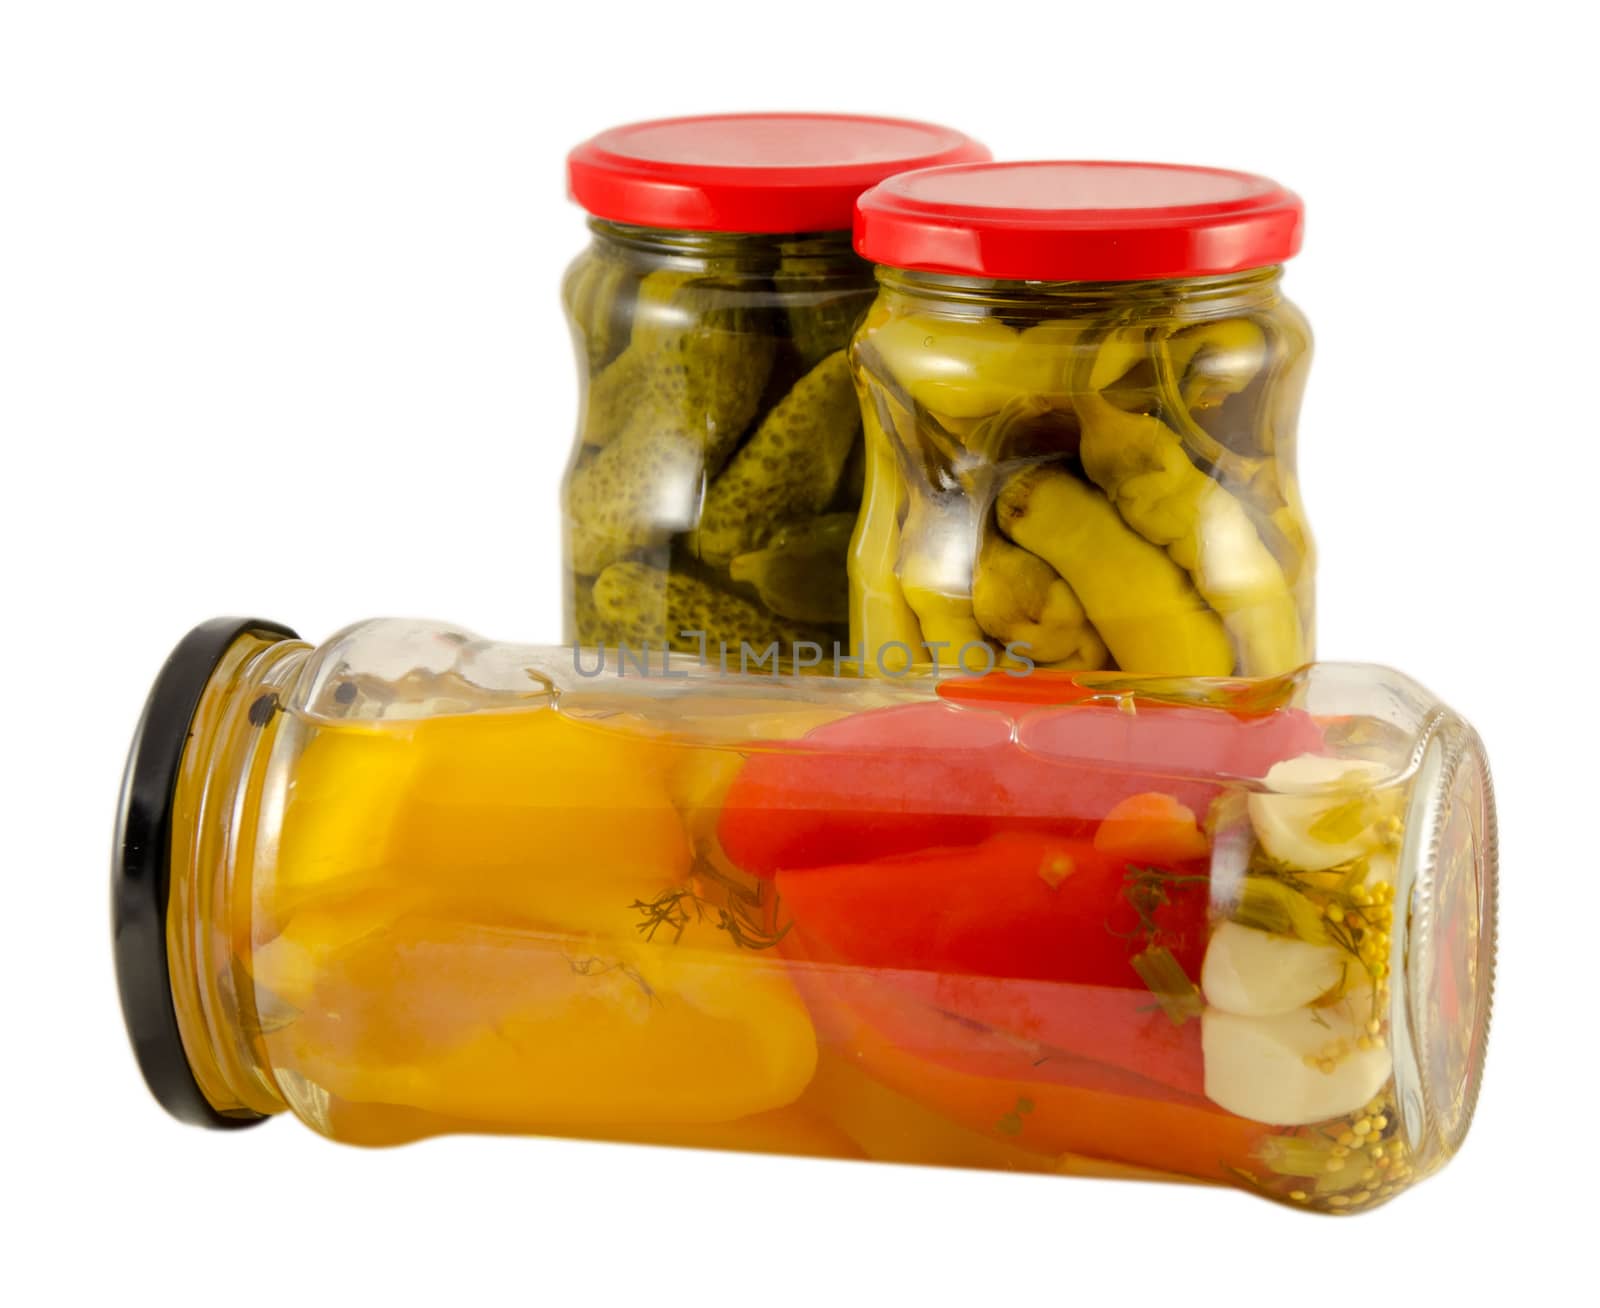 pickled jar hot red pepper and cucumber in vinegar isolated on white background